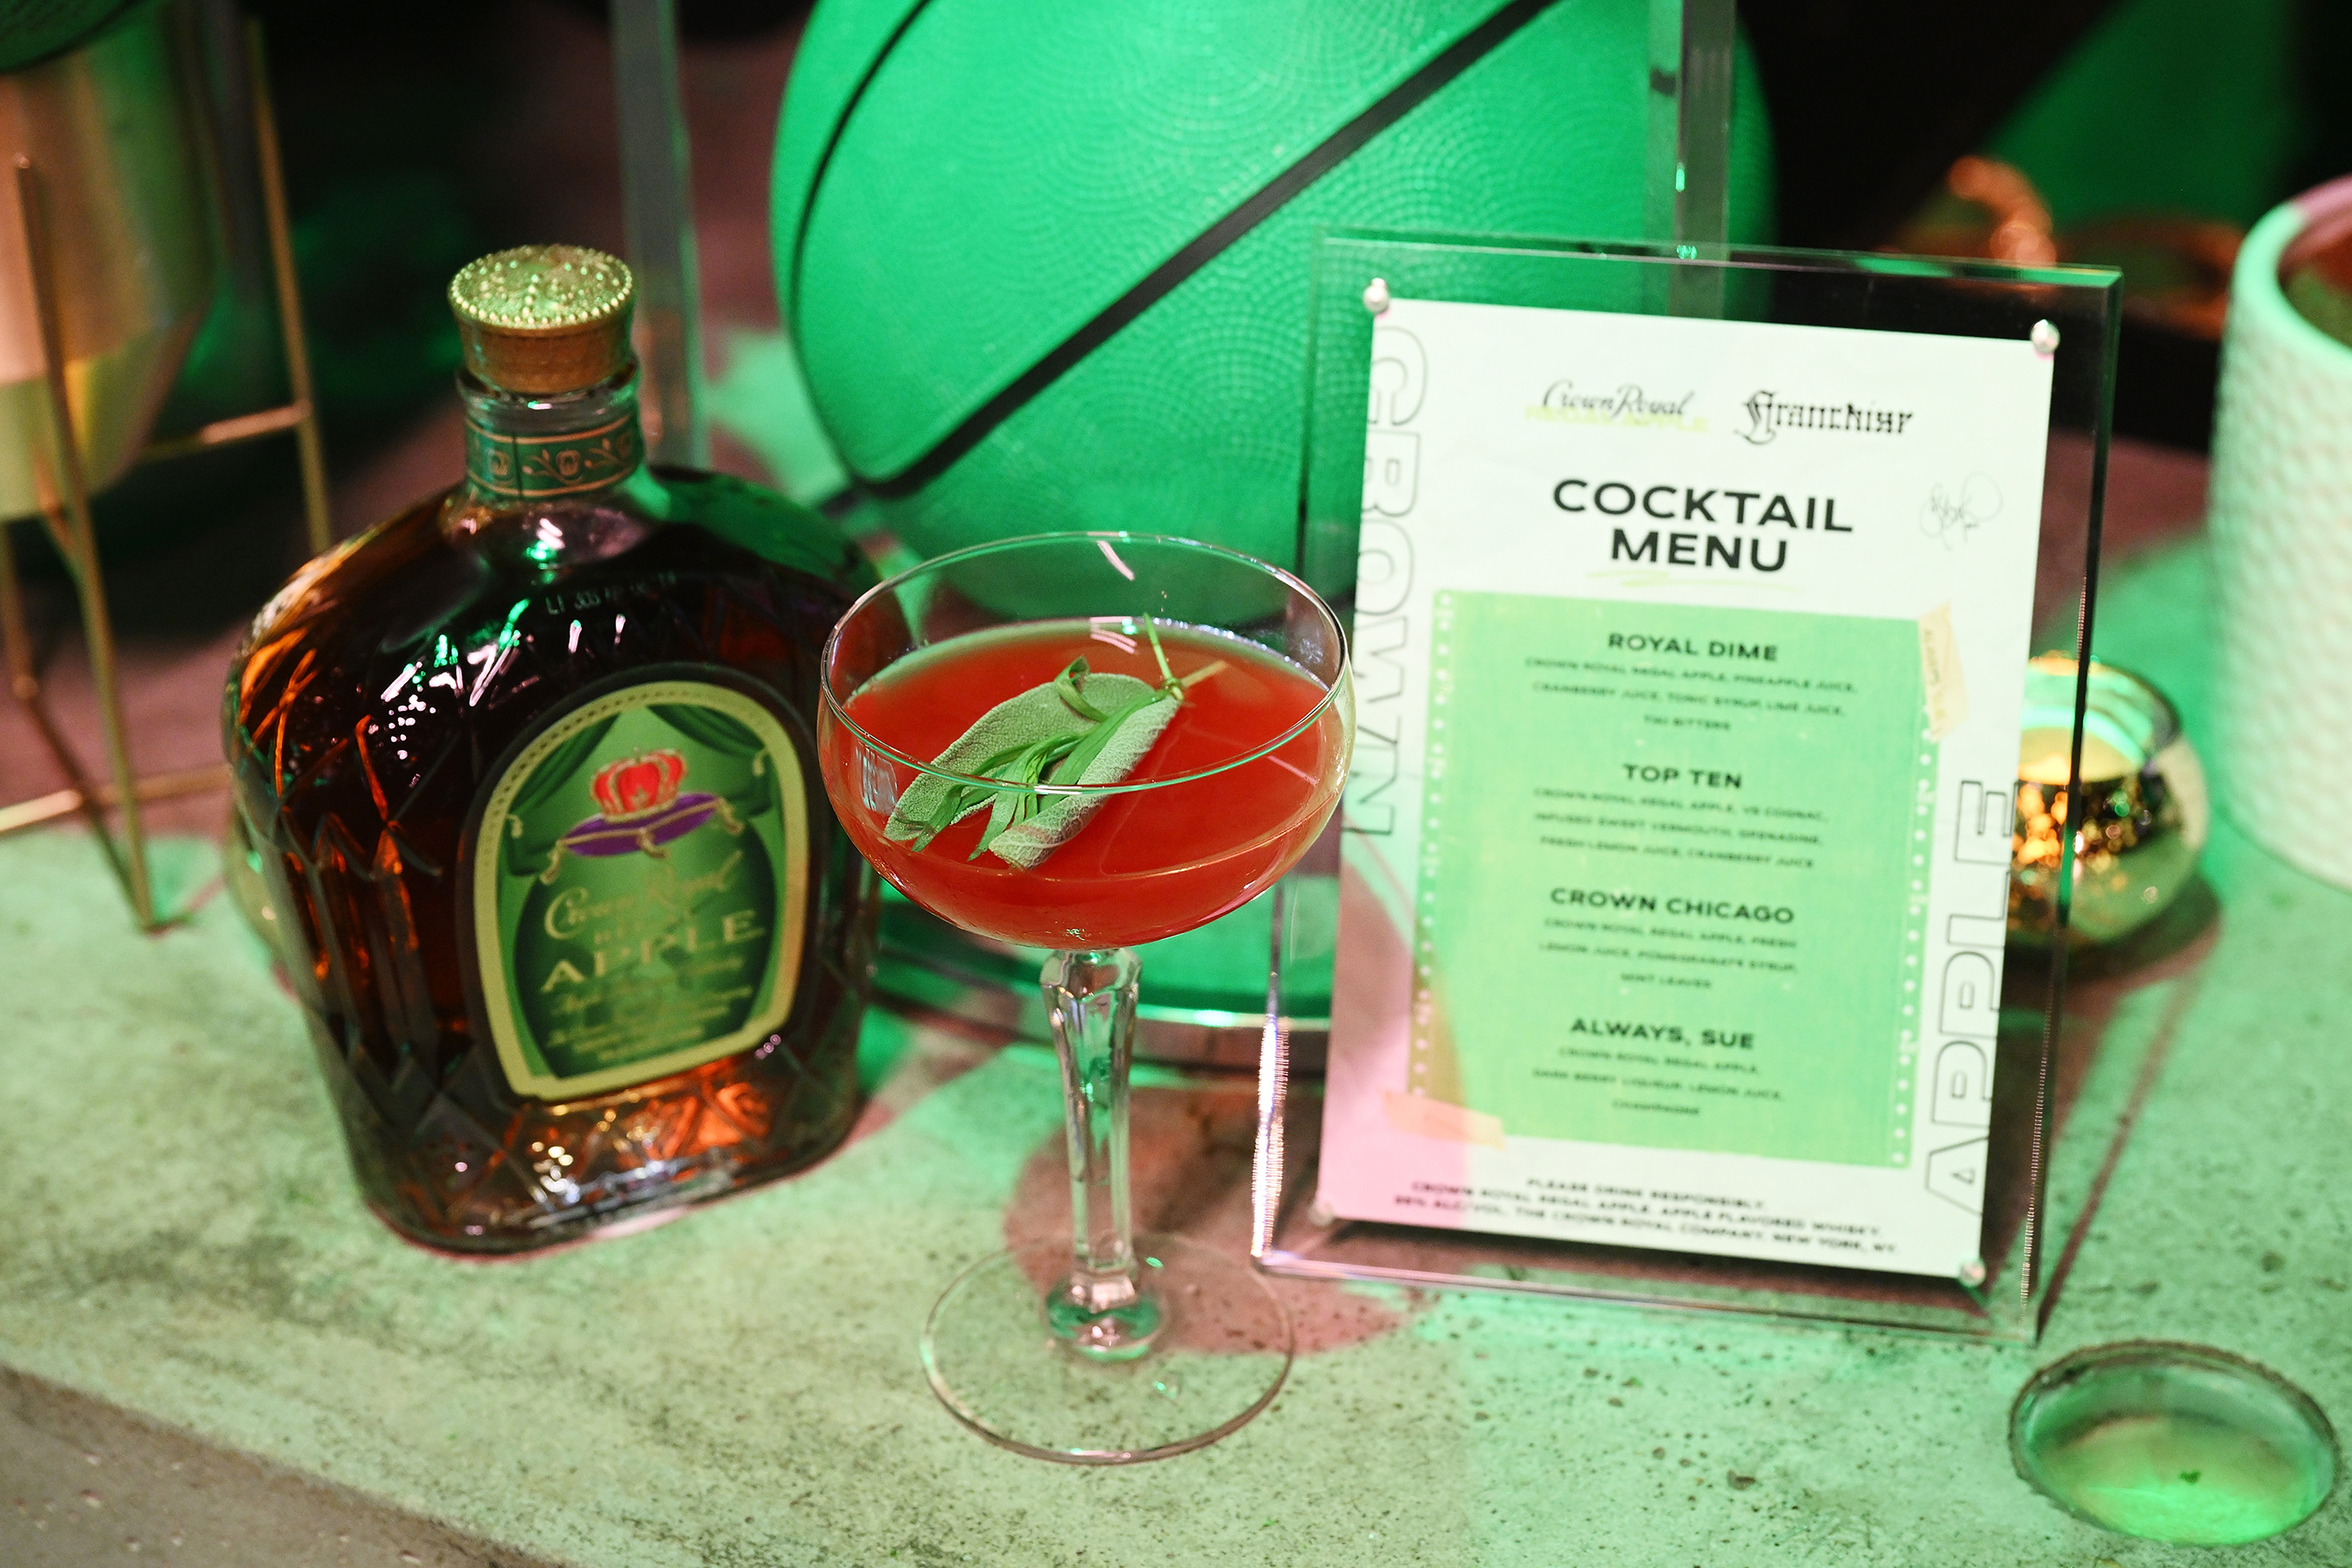 Crown Royal Regal Apple Teams Up With Sue Bird To Celebrate Her Farewell Season And Host An Issue Launch Party In Partnership With Franchise Magazine.